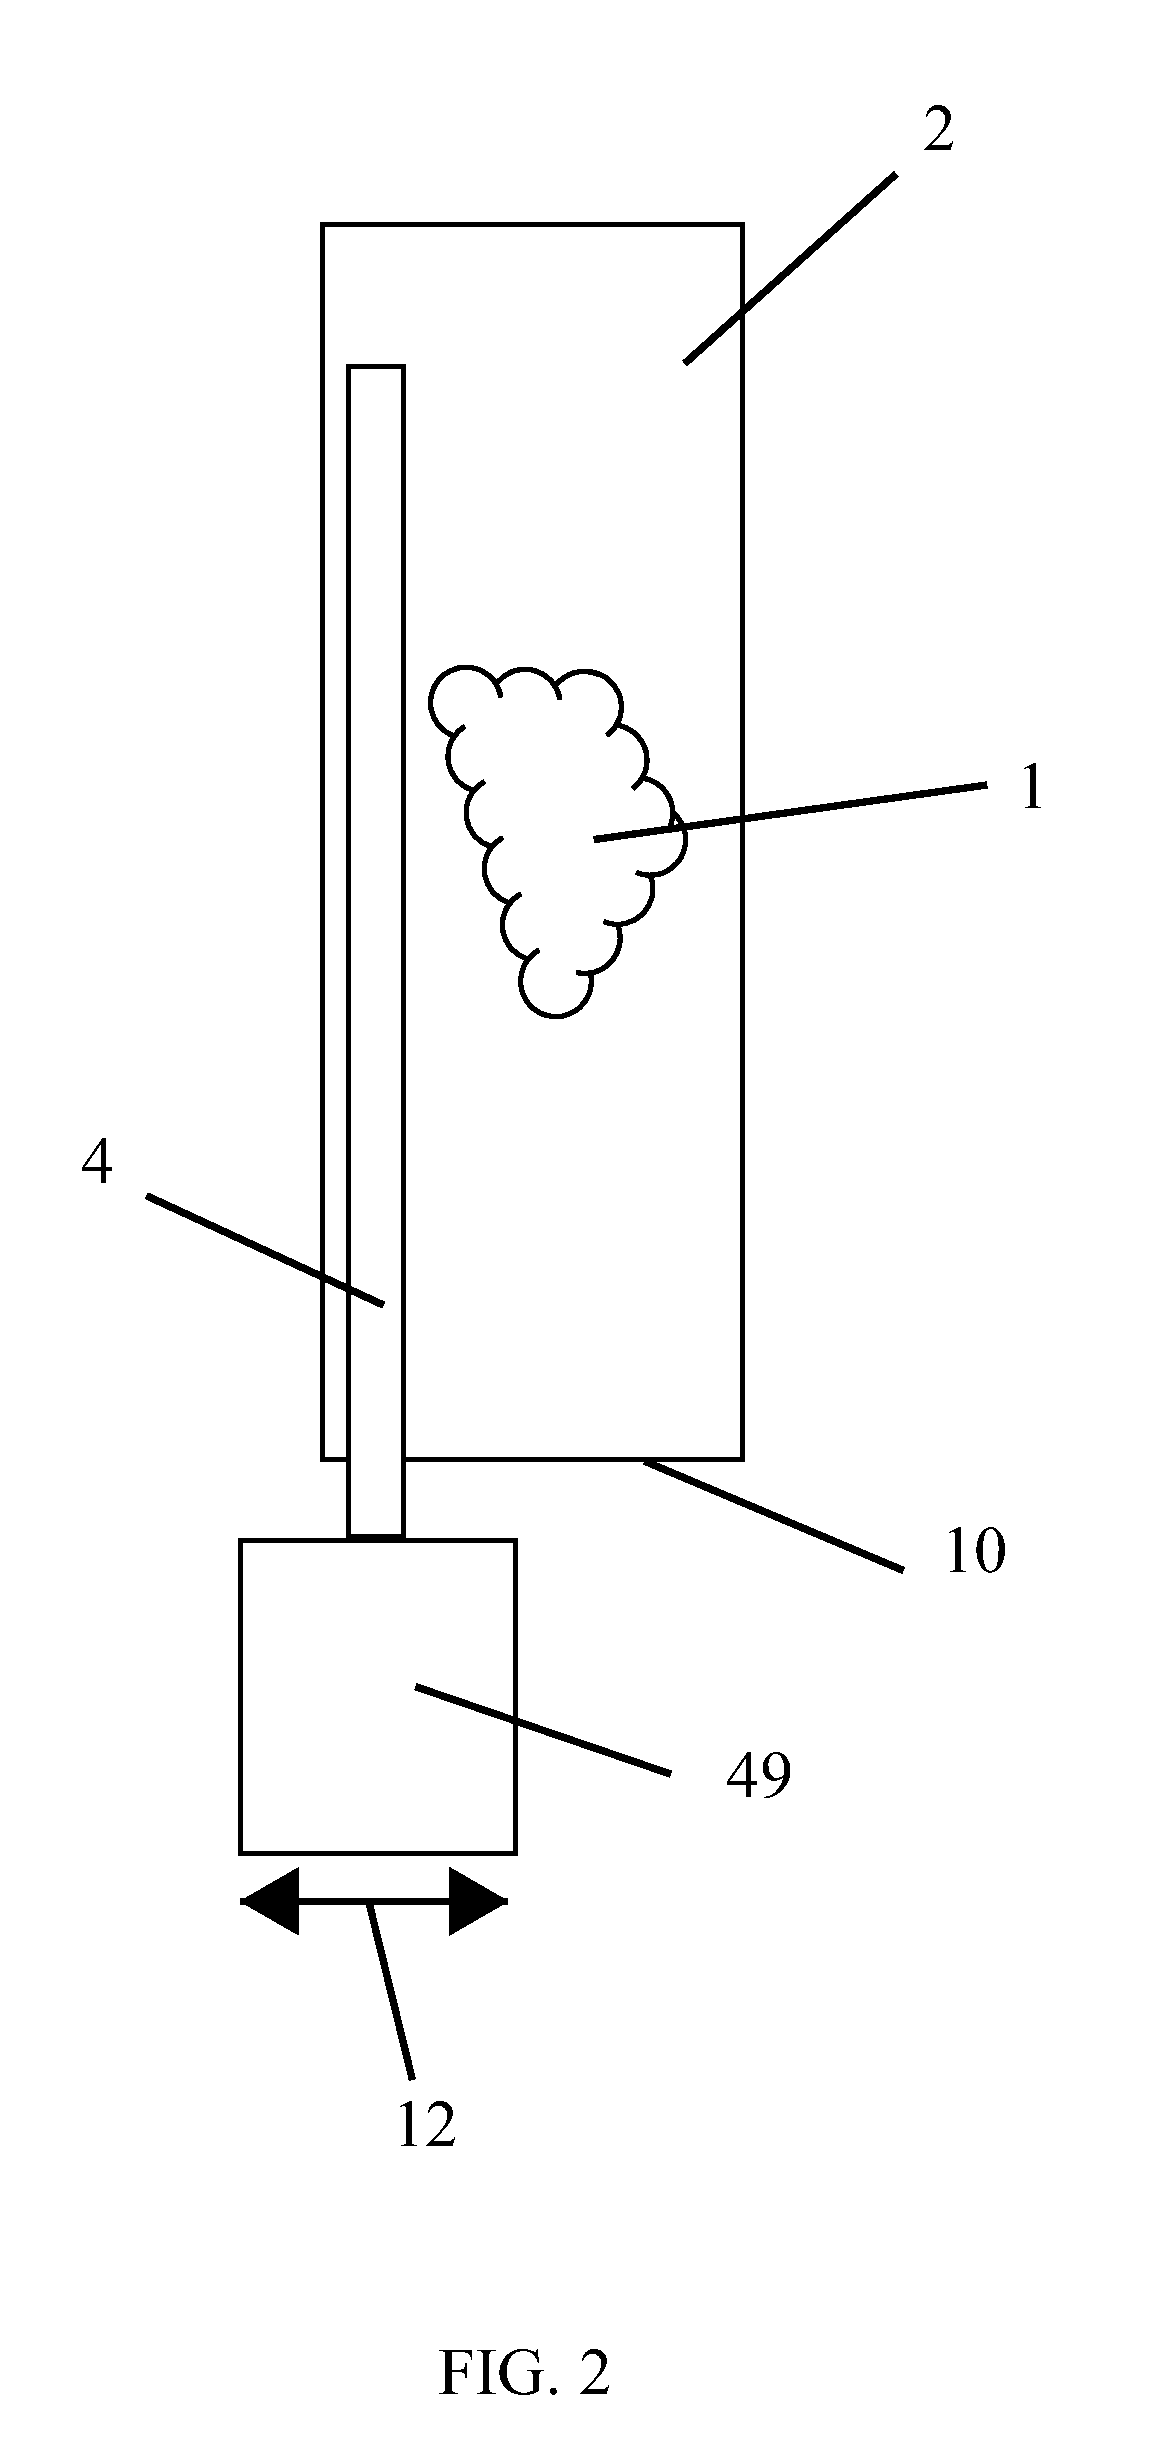 Methods and Systems for Efficient Processing of Biological Samples